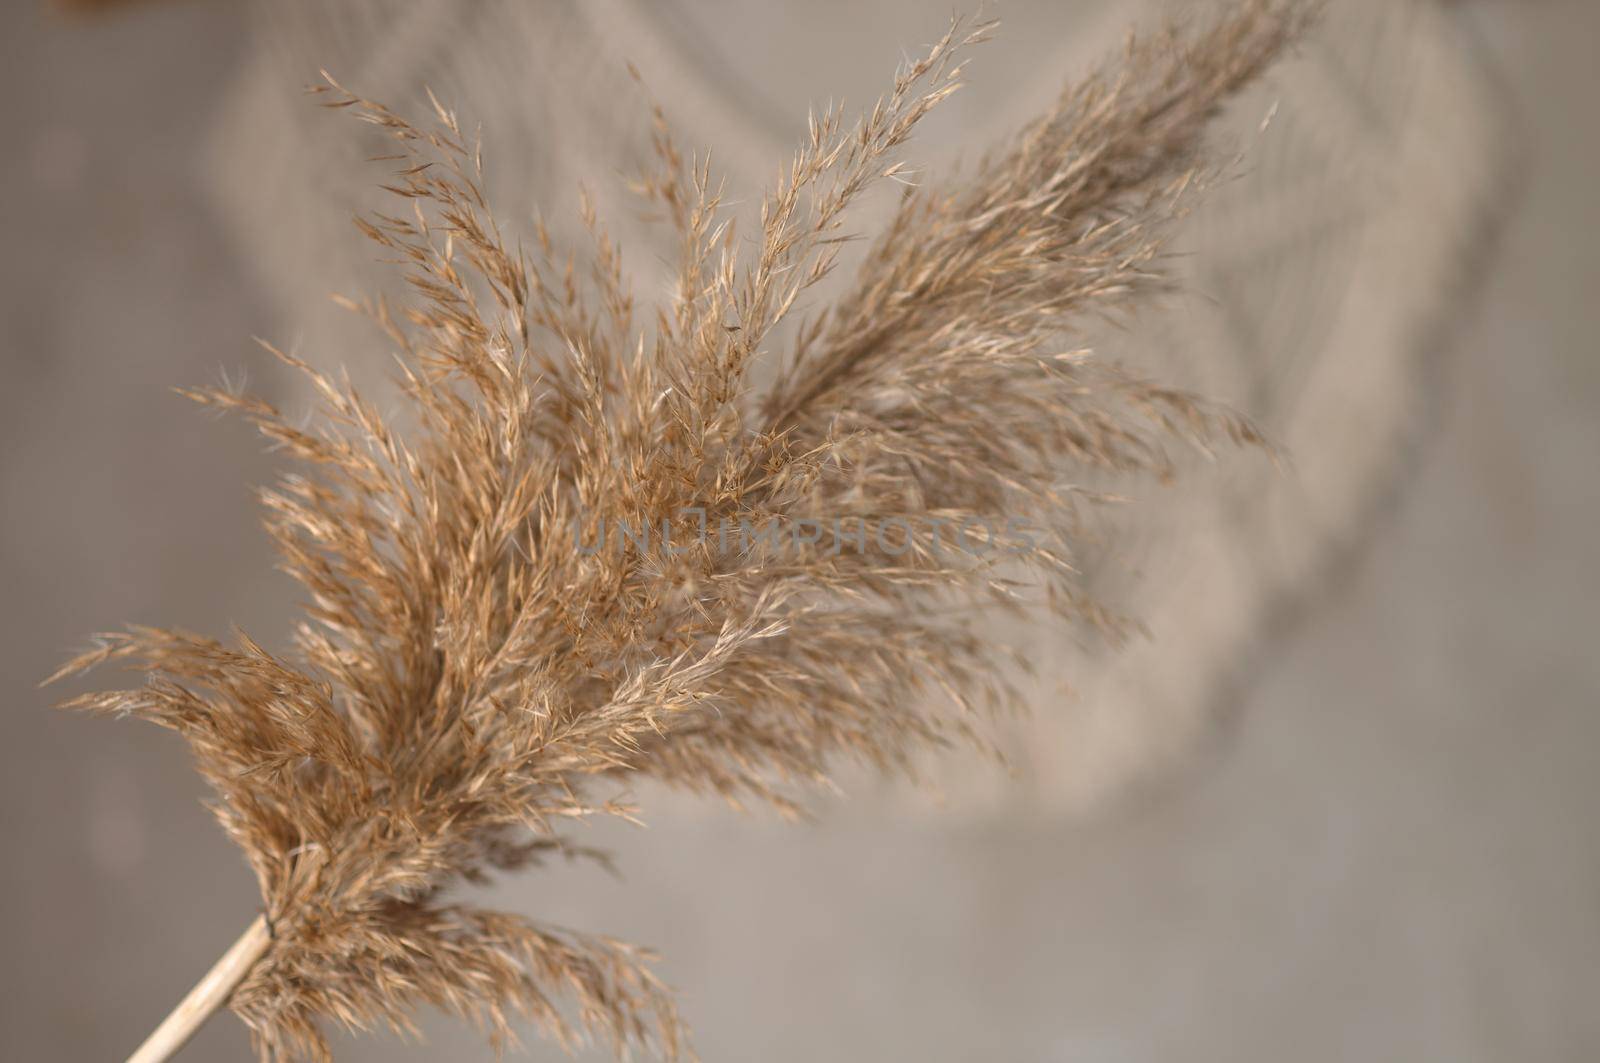 reed plant against a white brick wall background out of focus